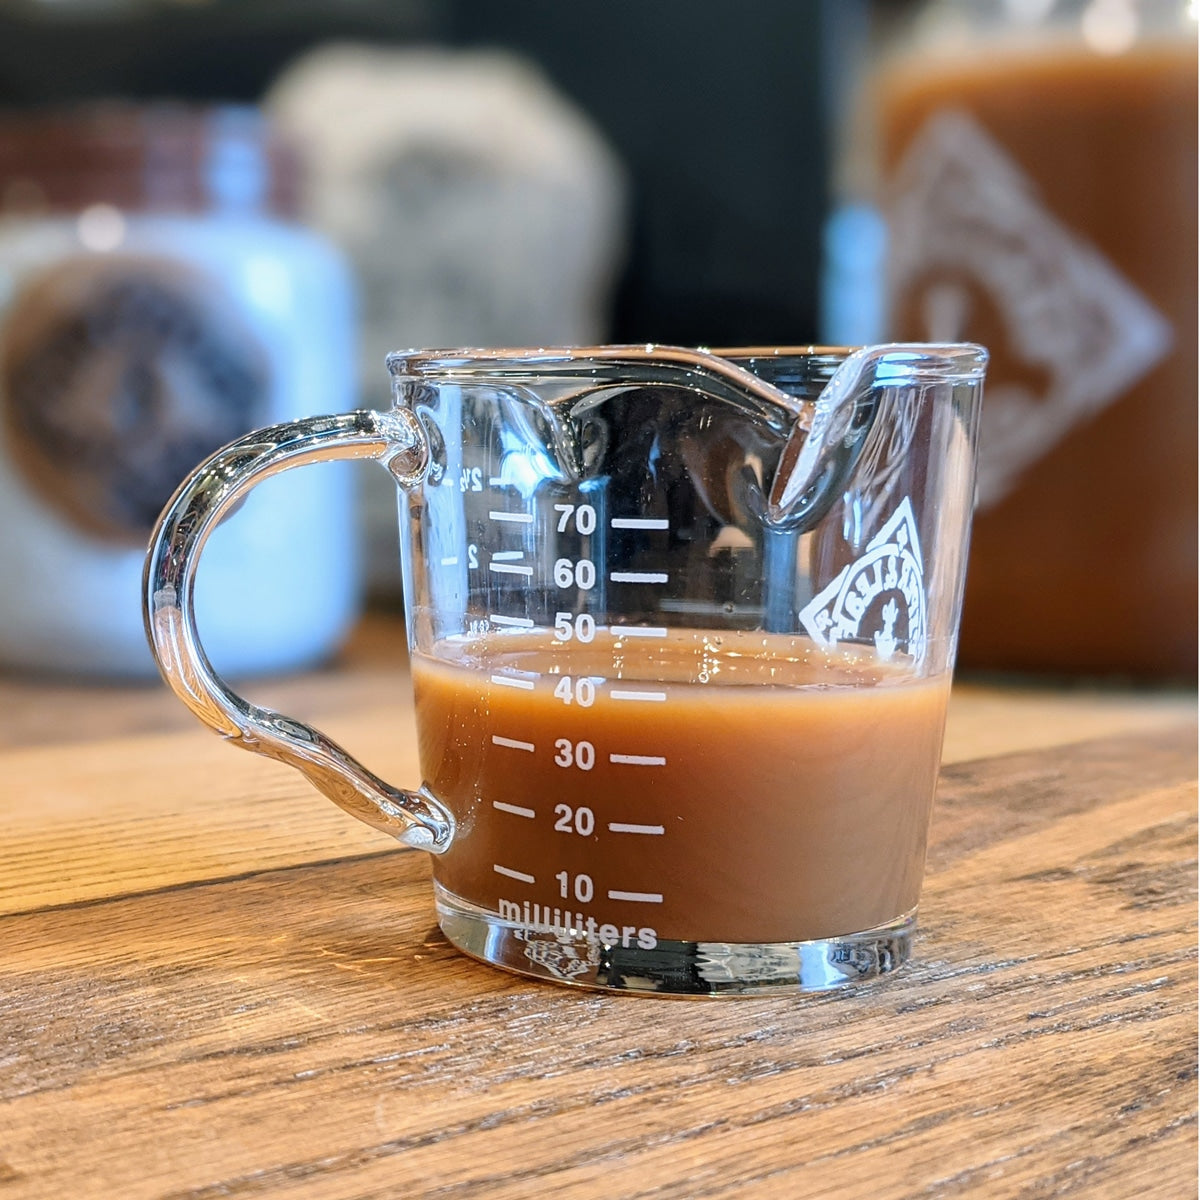 Piper Mini Measure - a tiny glass measuring cup with a little handle. Up to 70 milliliters or 2.5oz